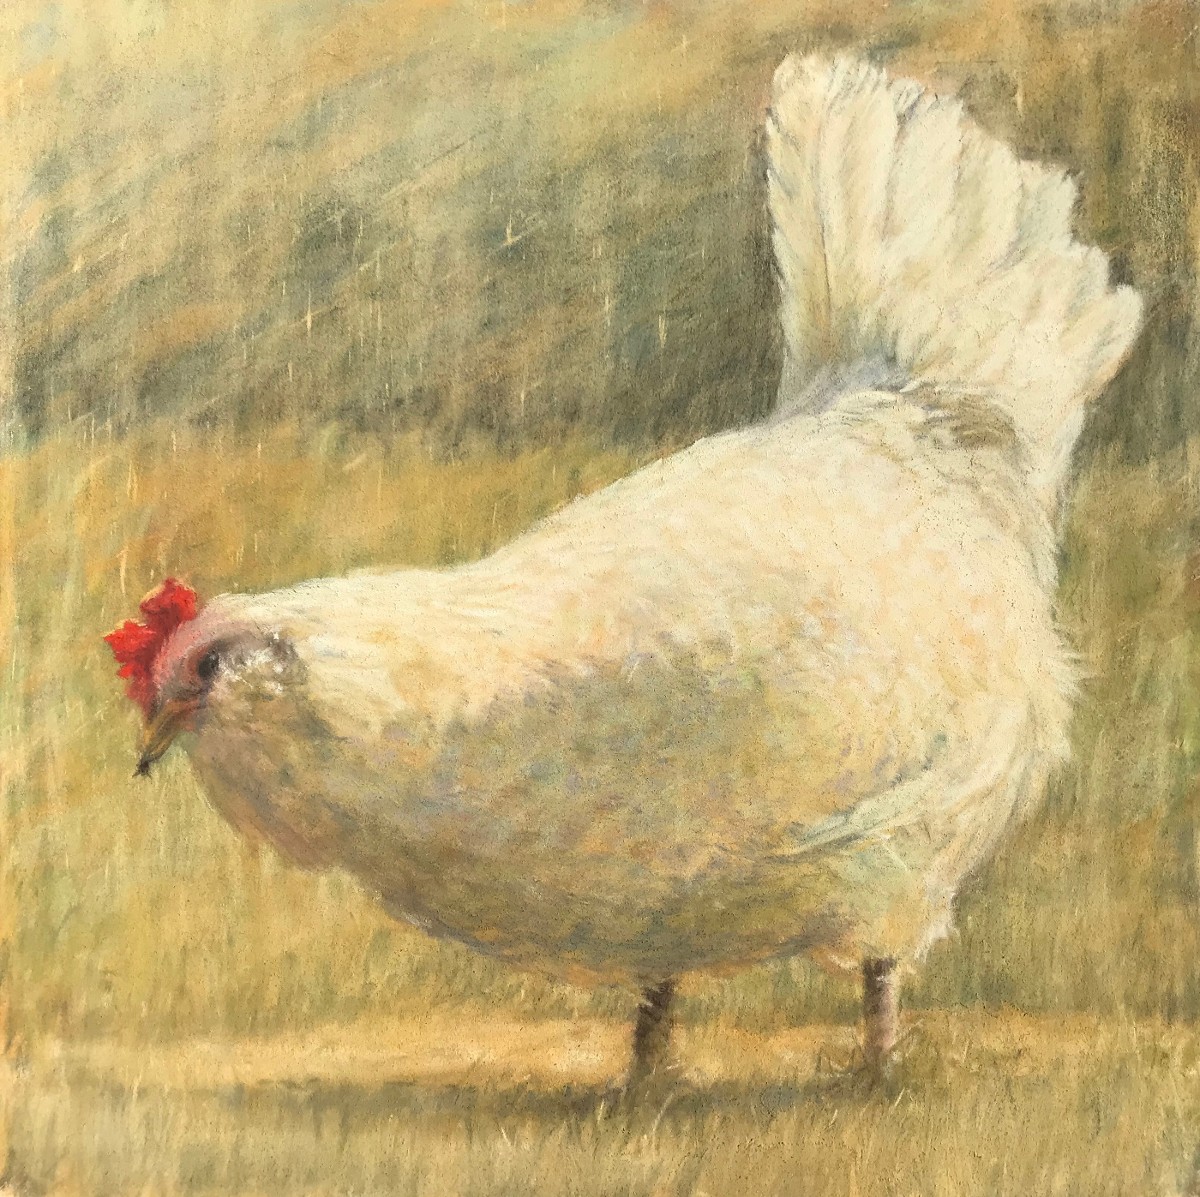 "A Hen and a Bug" by Lori Simmerman Goll